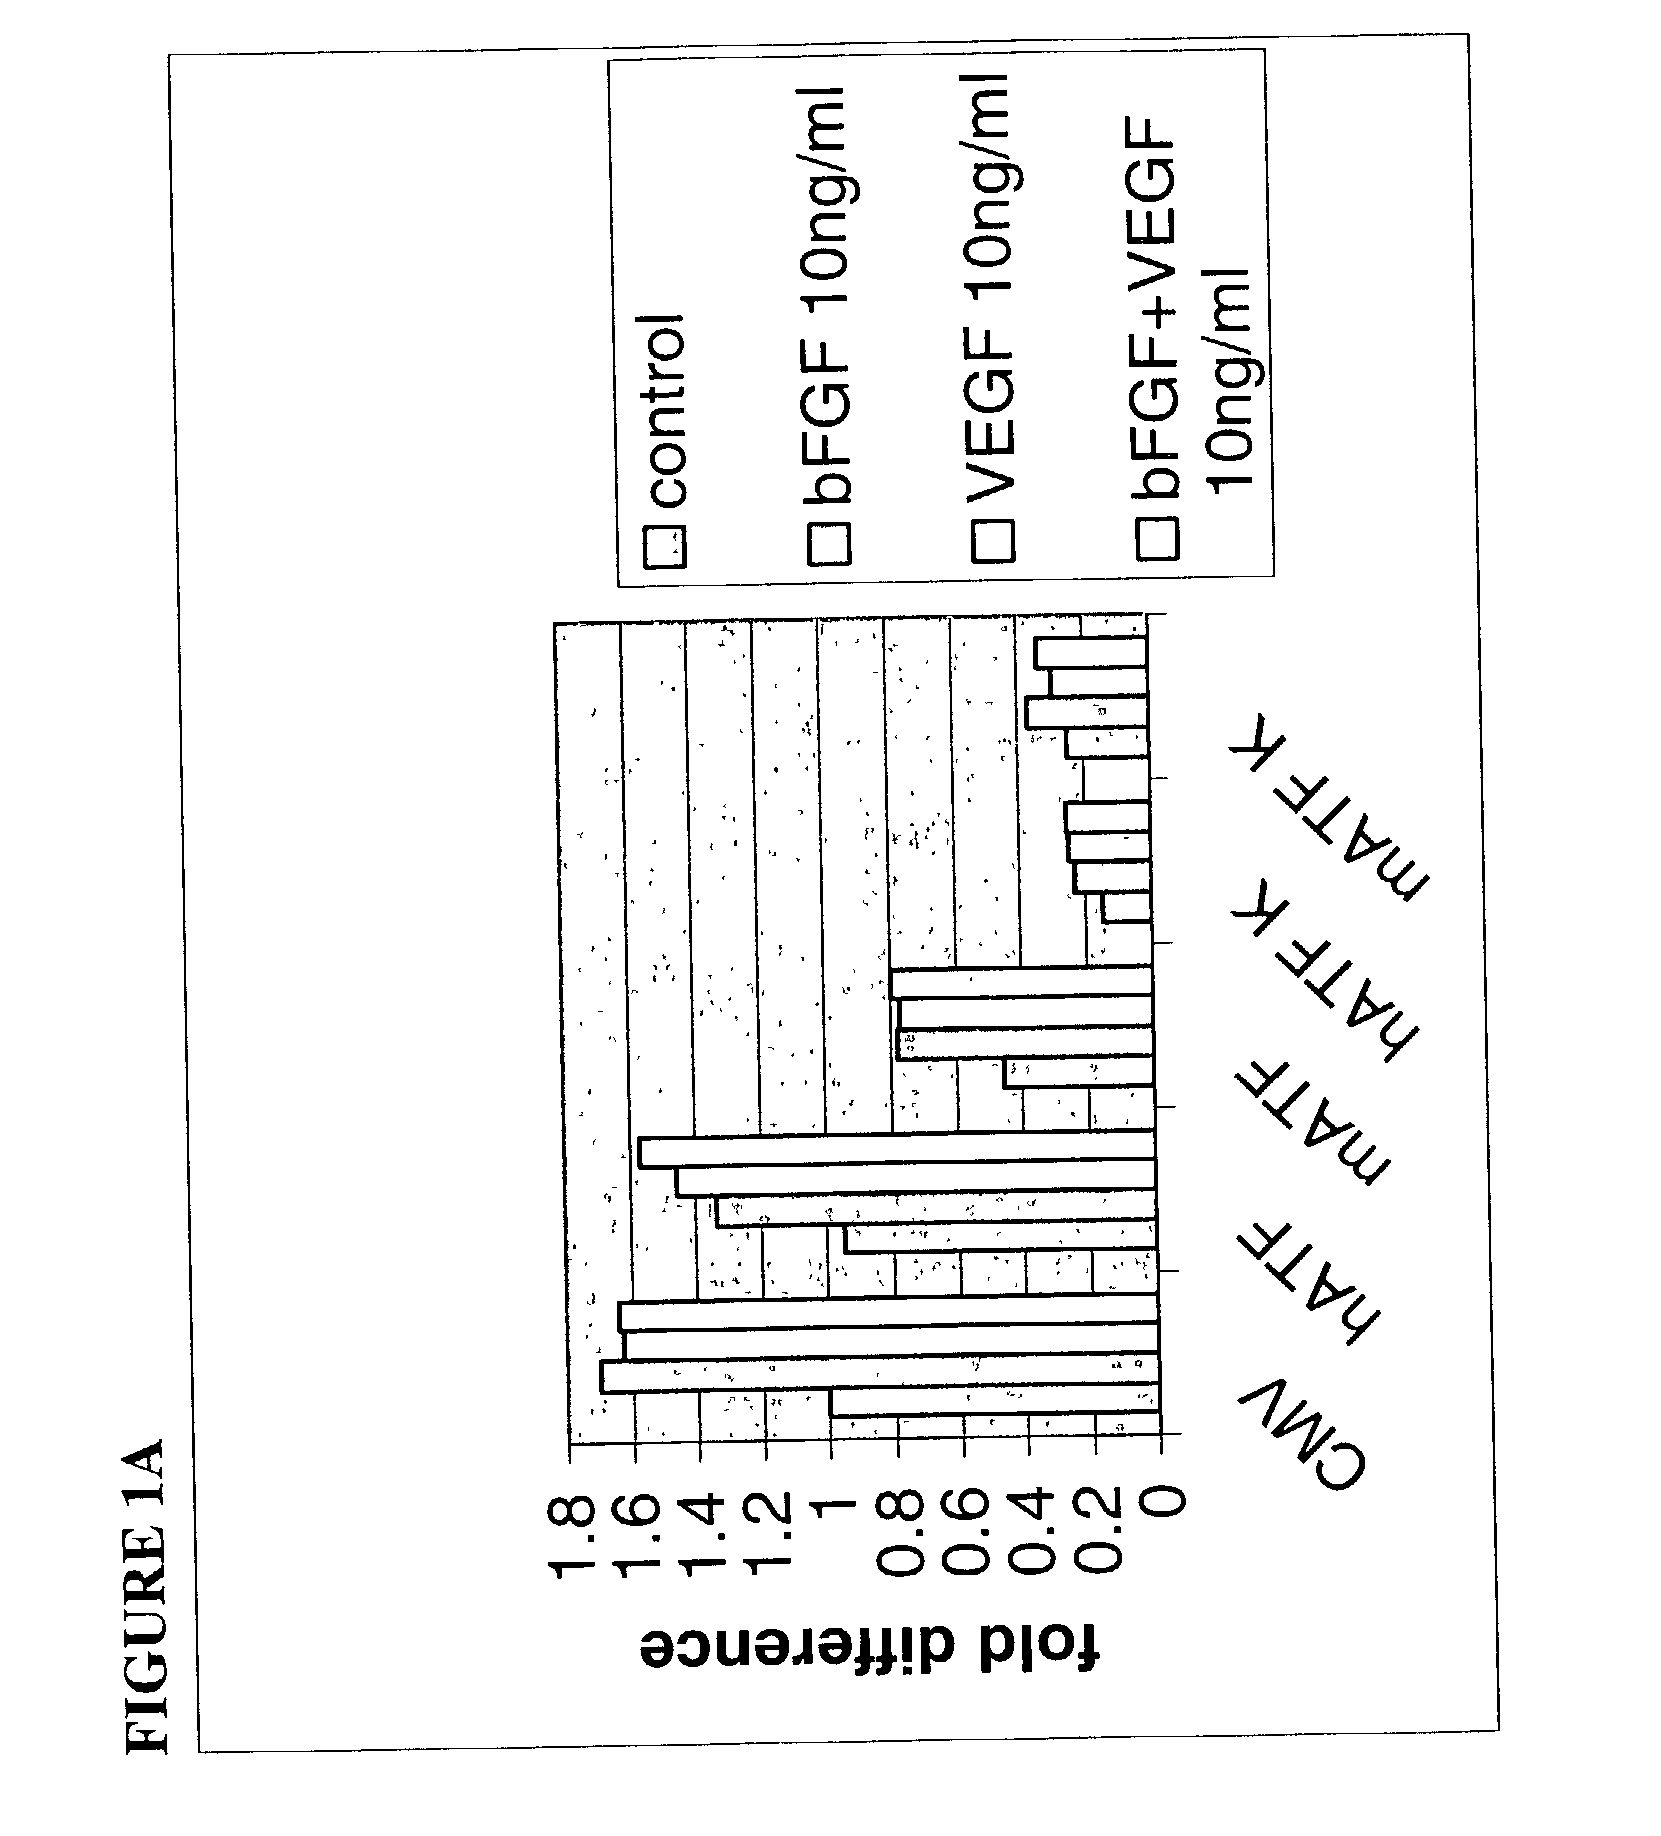 Abrogen polypeptides, nucleic acids encoding them and methods for using them to inhibit angiogenesis